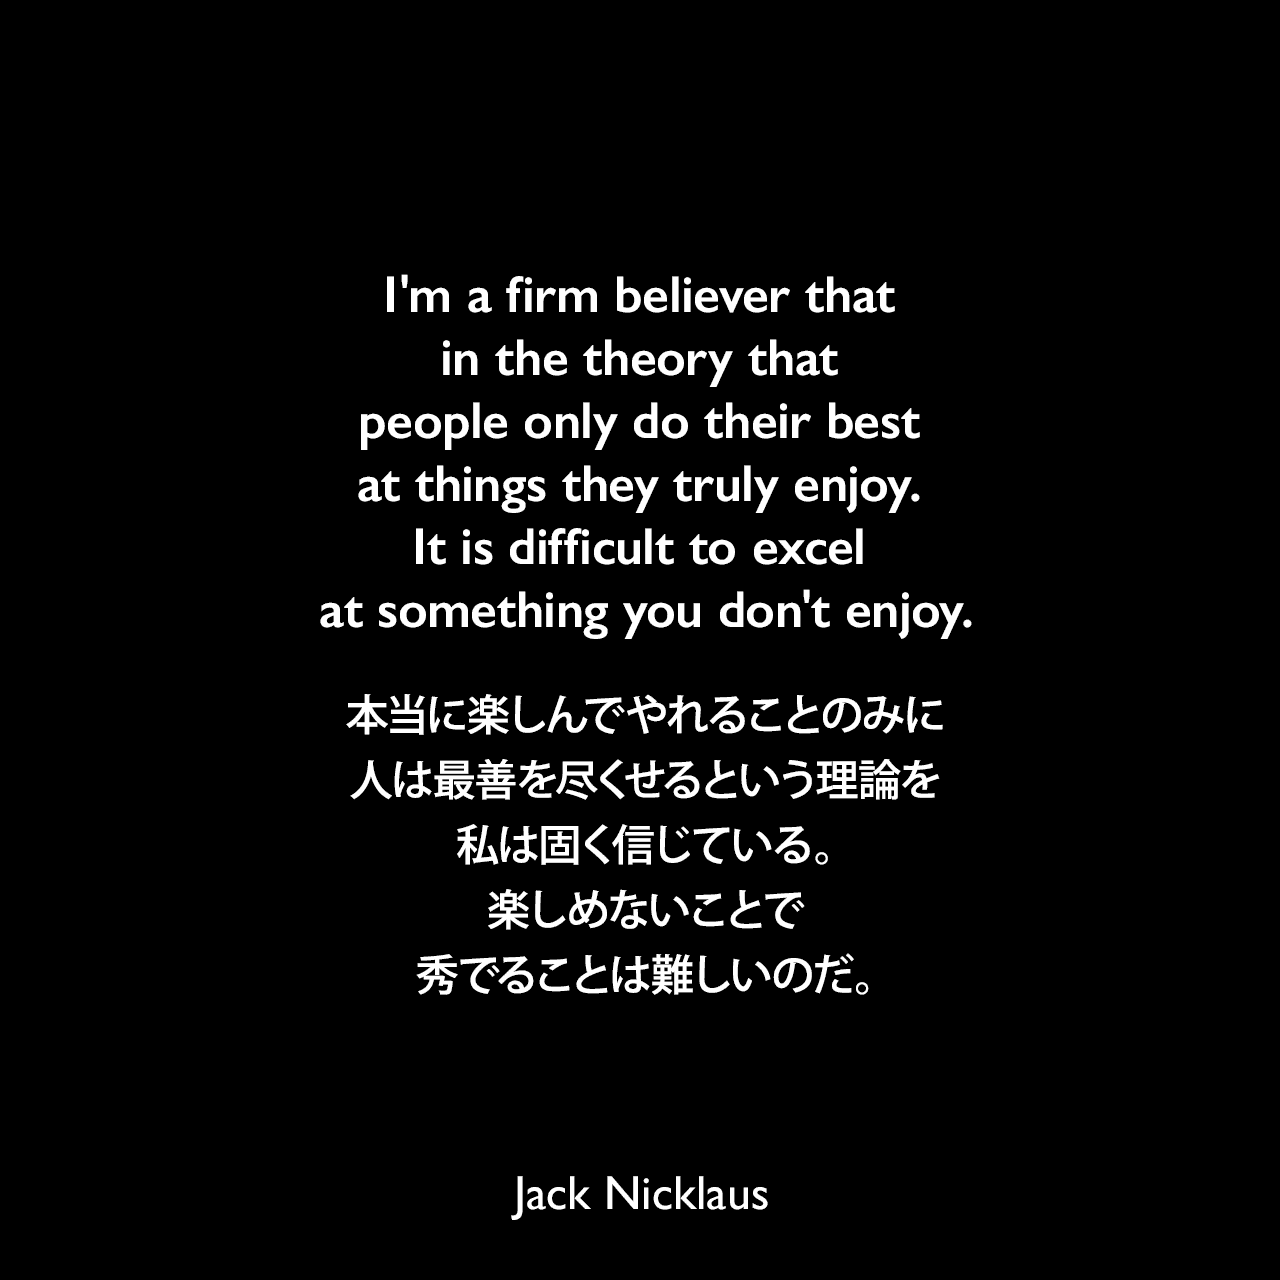 I'm a firm believer that in the theory that people only do their best at things they truly enjoy. It is difficult to excel at something you don't enjoy.本当に楽しんでやれることのみに、人は最善を尽くせるという理論を私は固く信じている。楽しめないことで秀でることは難しいのだ。Jack Nicklaus